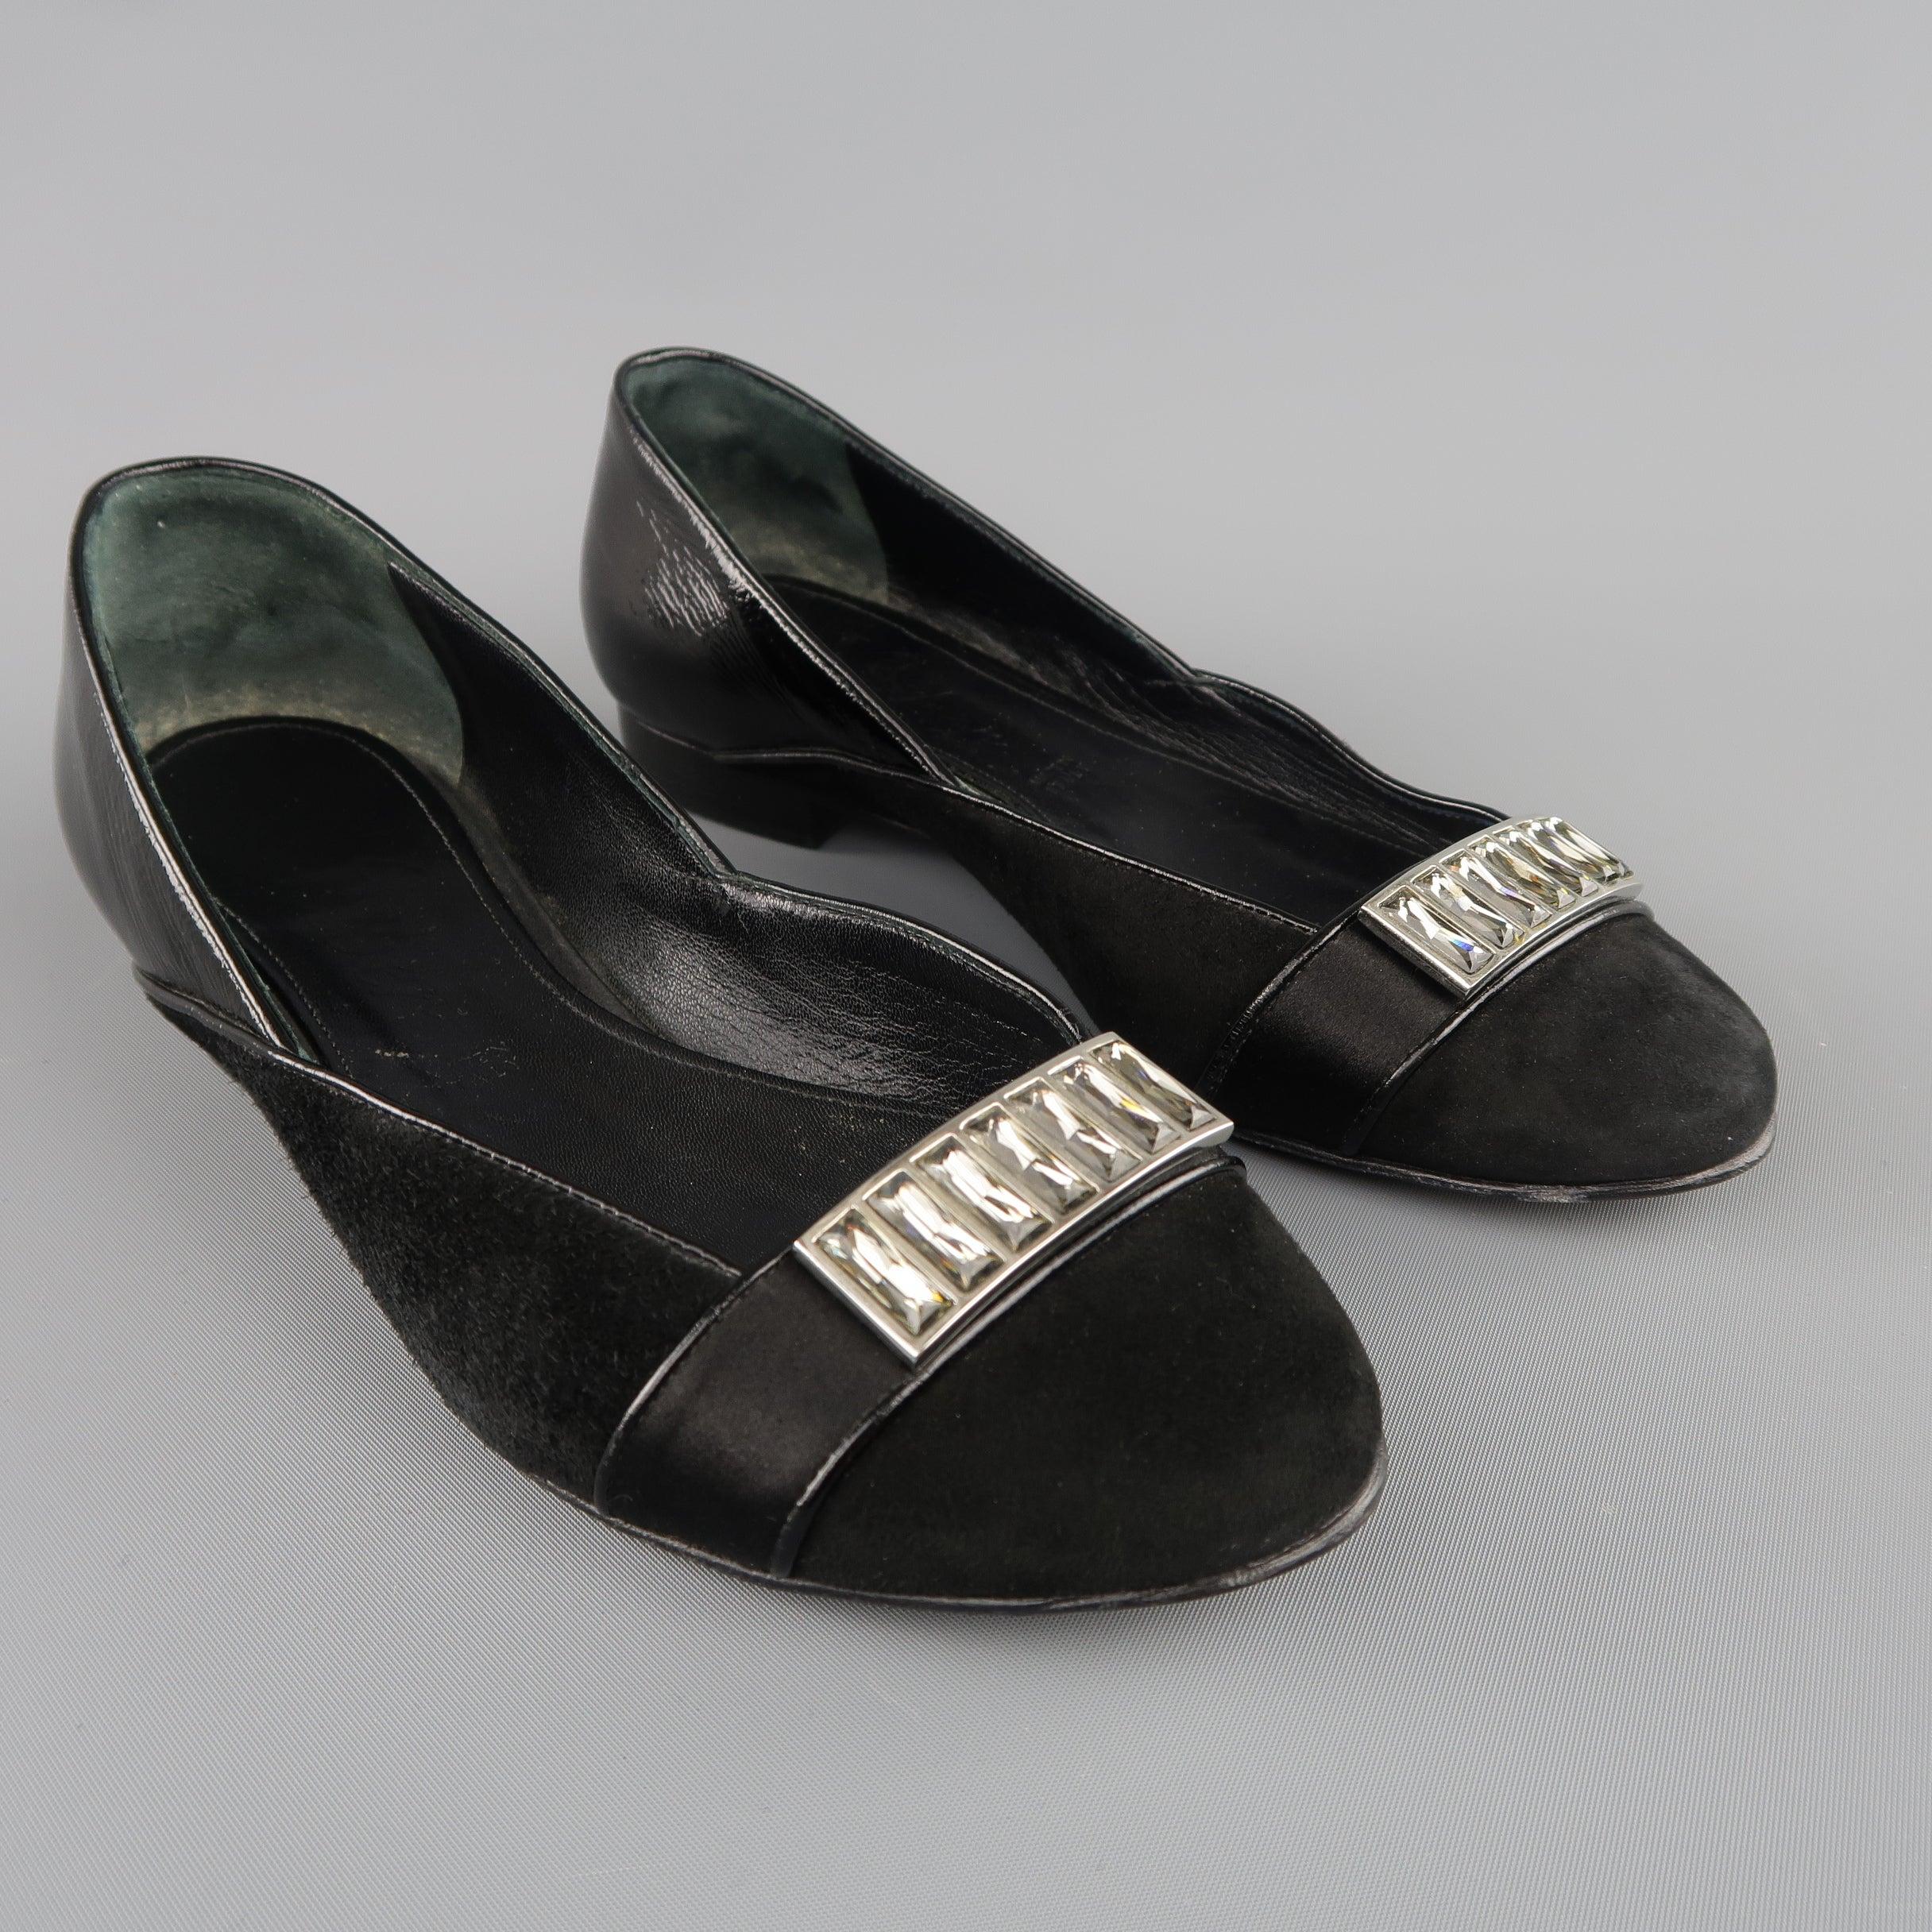 JUDITH LEIBER flats come in black suede and feature a patent leather heel panel, and satin strap detail with rhinestone brooch applique. Made in Italy.
Good Pre-Owned Condition.
 

Marked:   5 B
l	Outsole: 9 x 3 inches 

  
  
  
 
Reference: